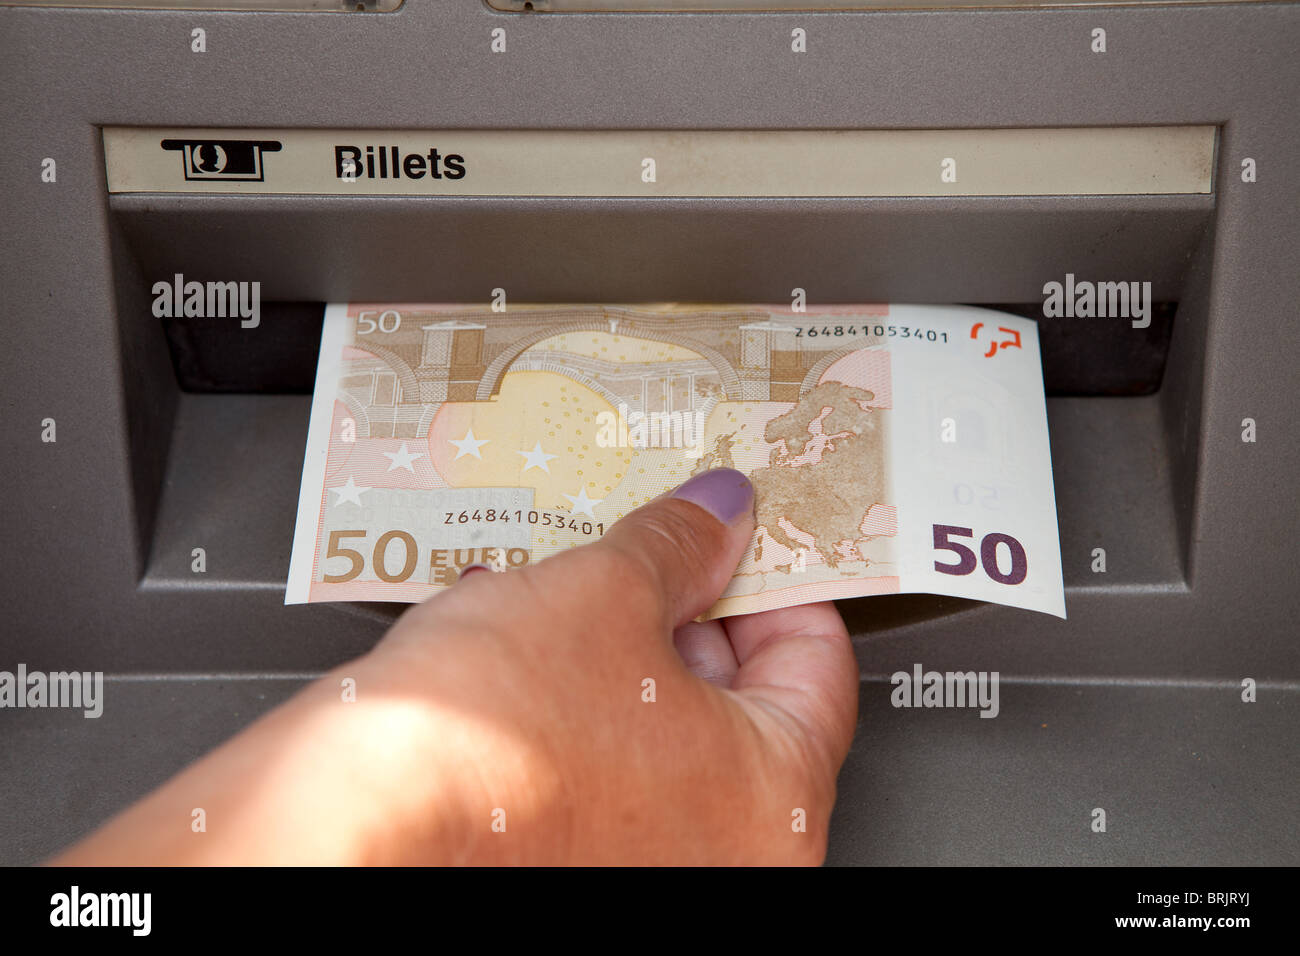 ATM Access : a womans hand withdraws money at cashpoints Stock Photo